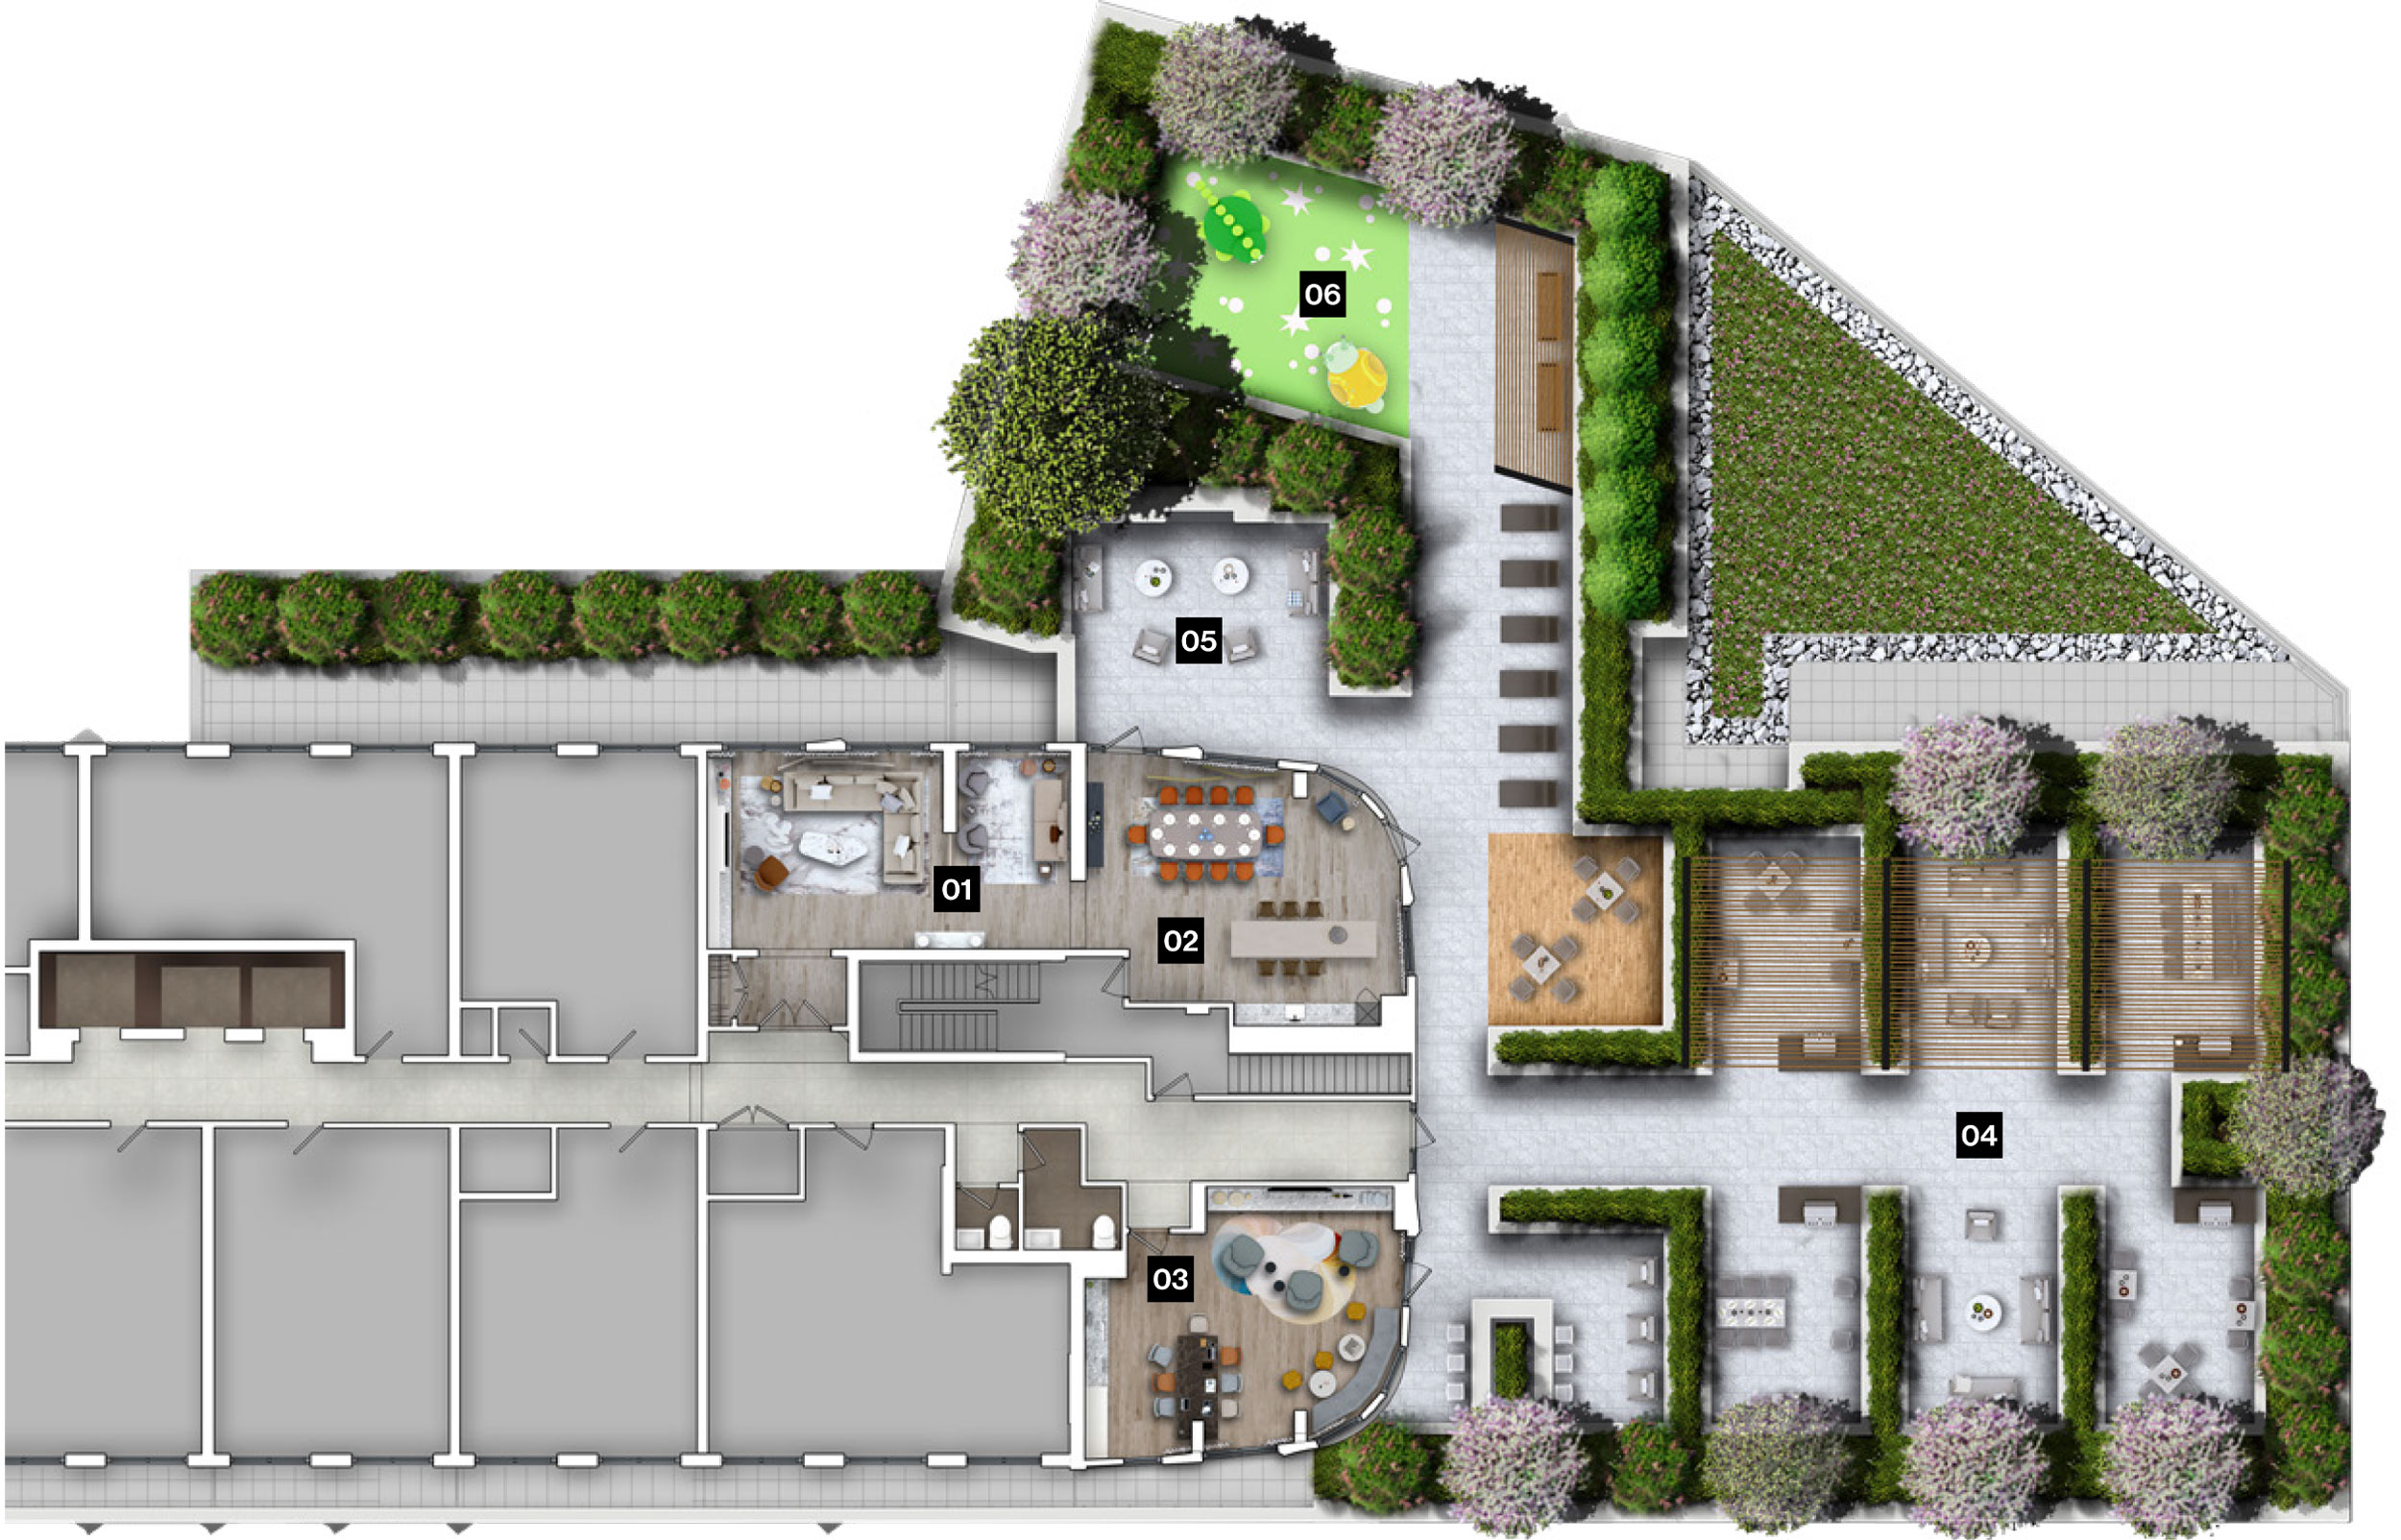 Westerly Rooftop Amenity Plan